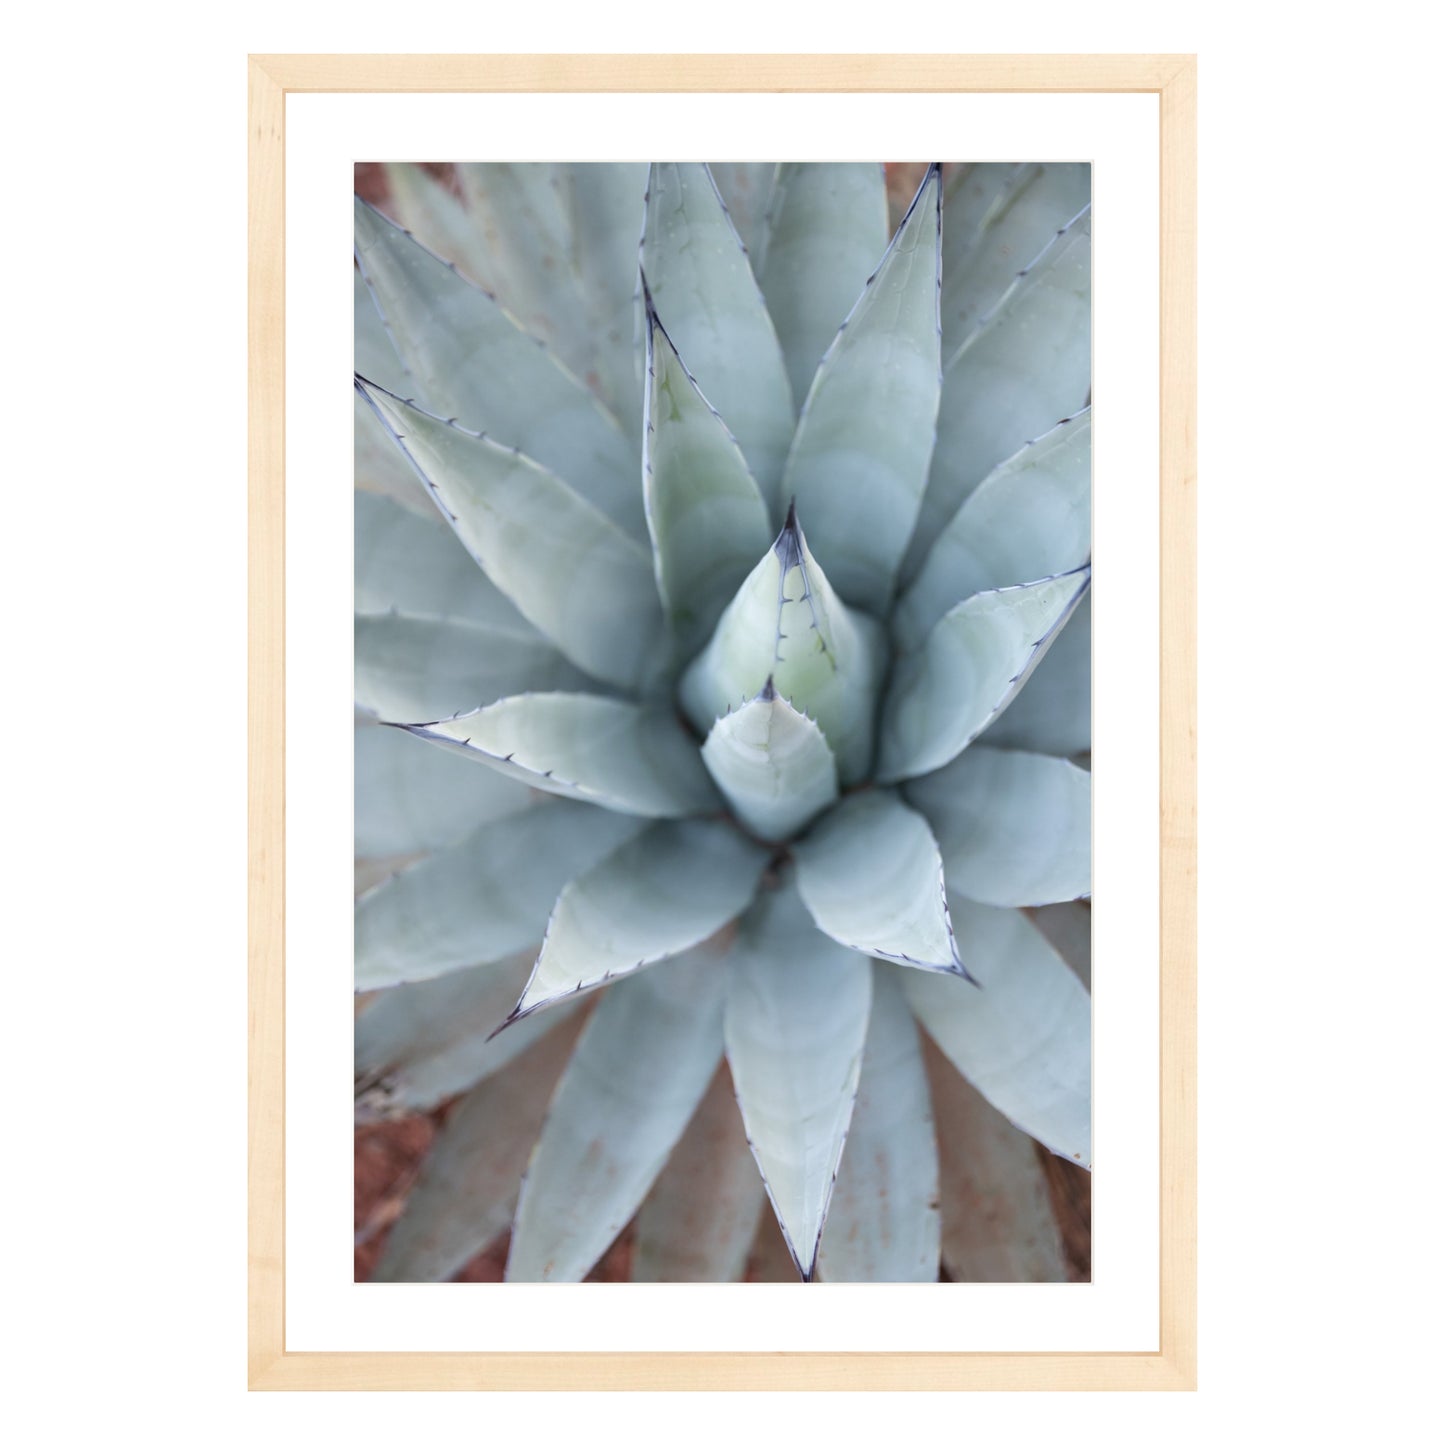 Photograph of agave plant framed in natural wood with white mat